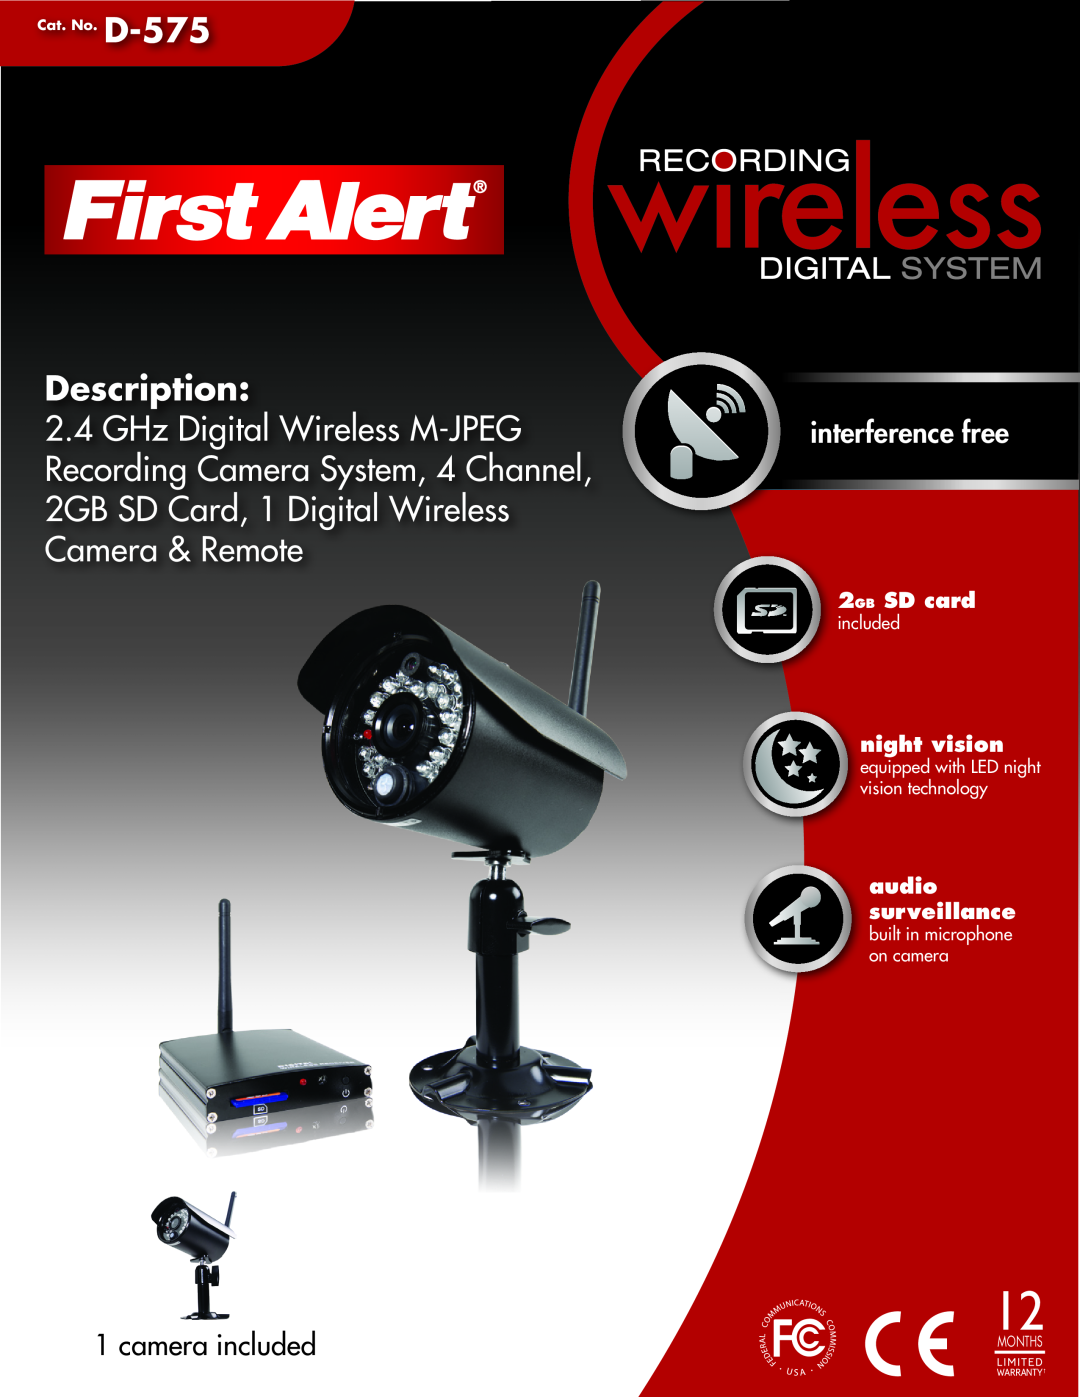 First Alert D575 manual Description, interference free, camera included, night vision, audio surveillance, Cat. No. D-575 